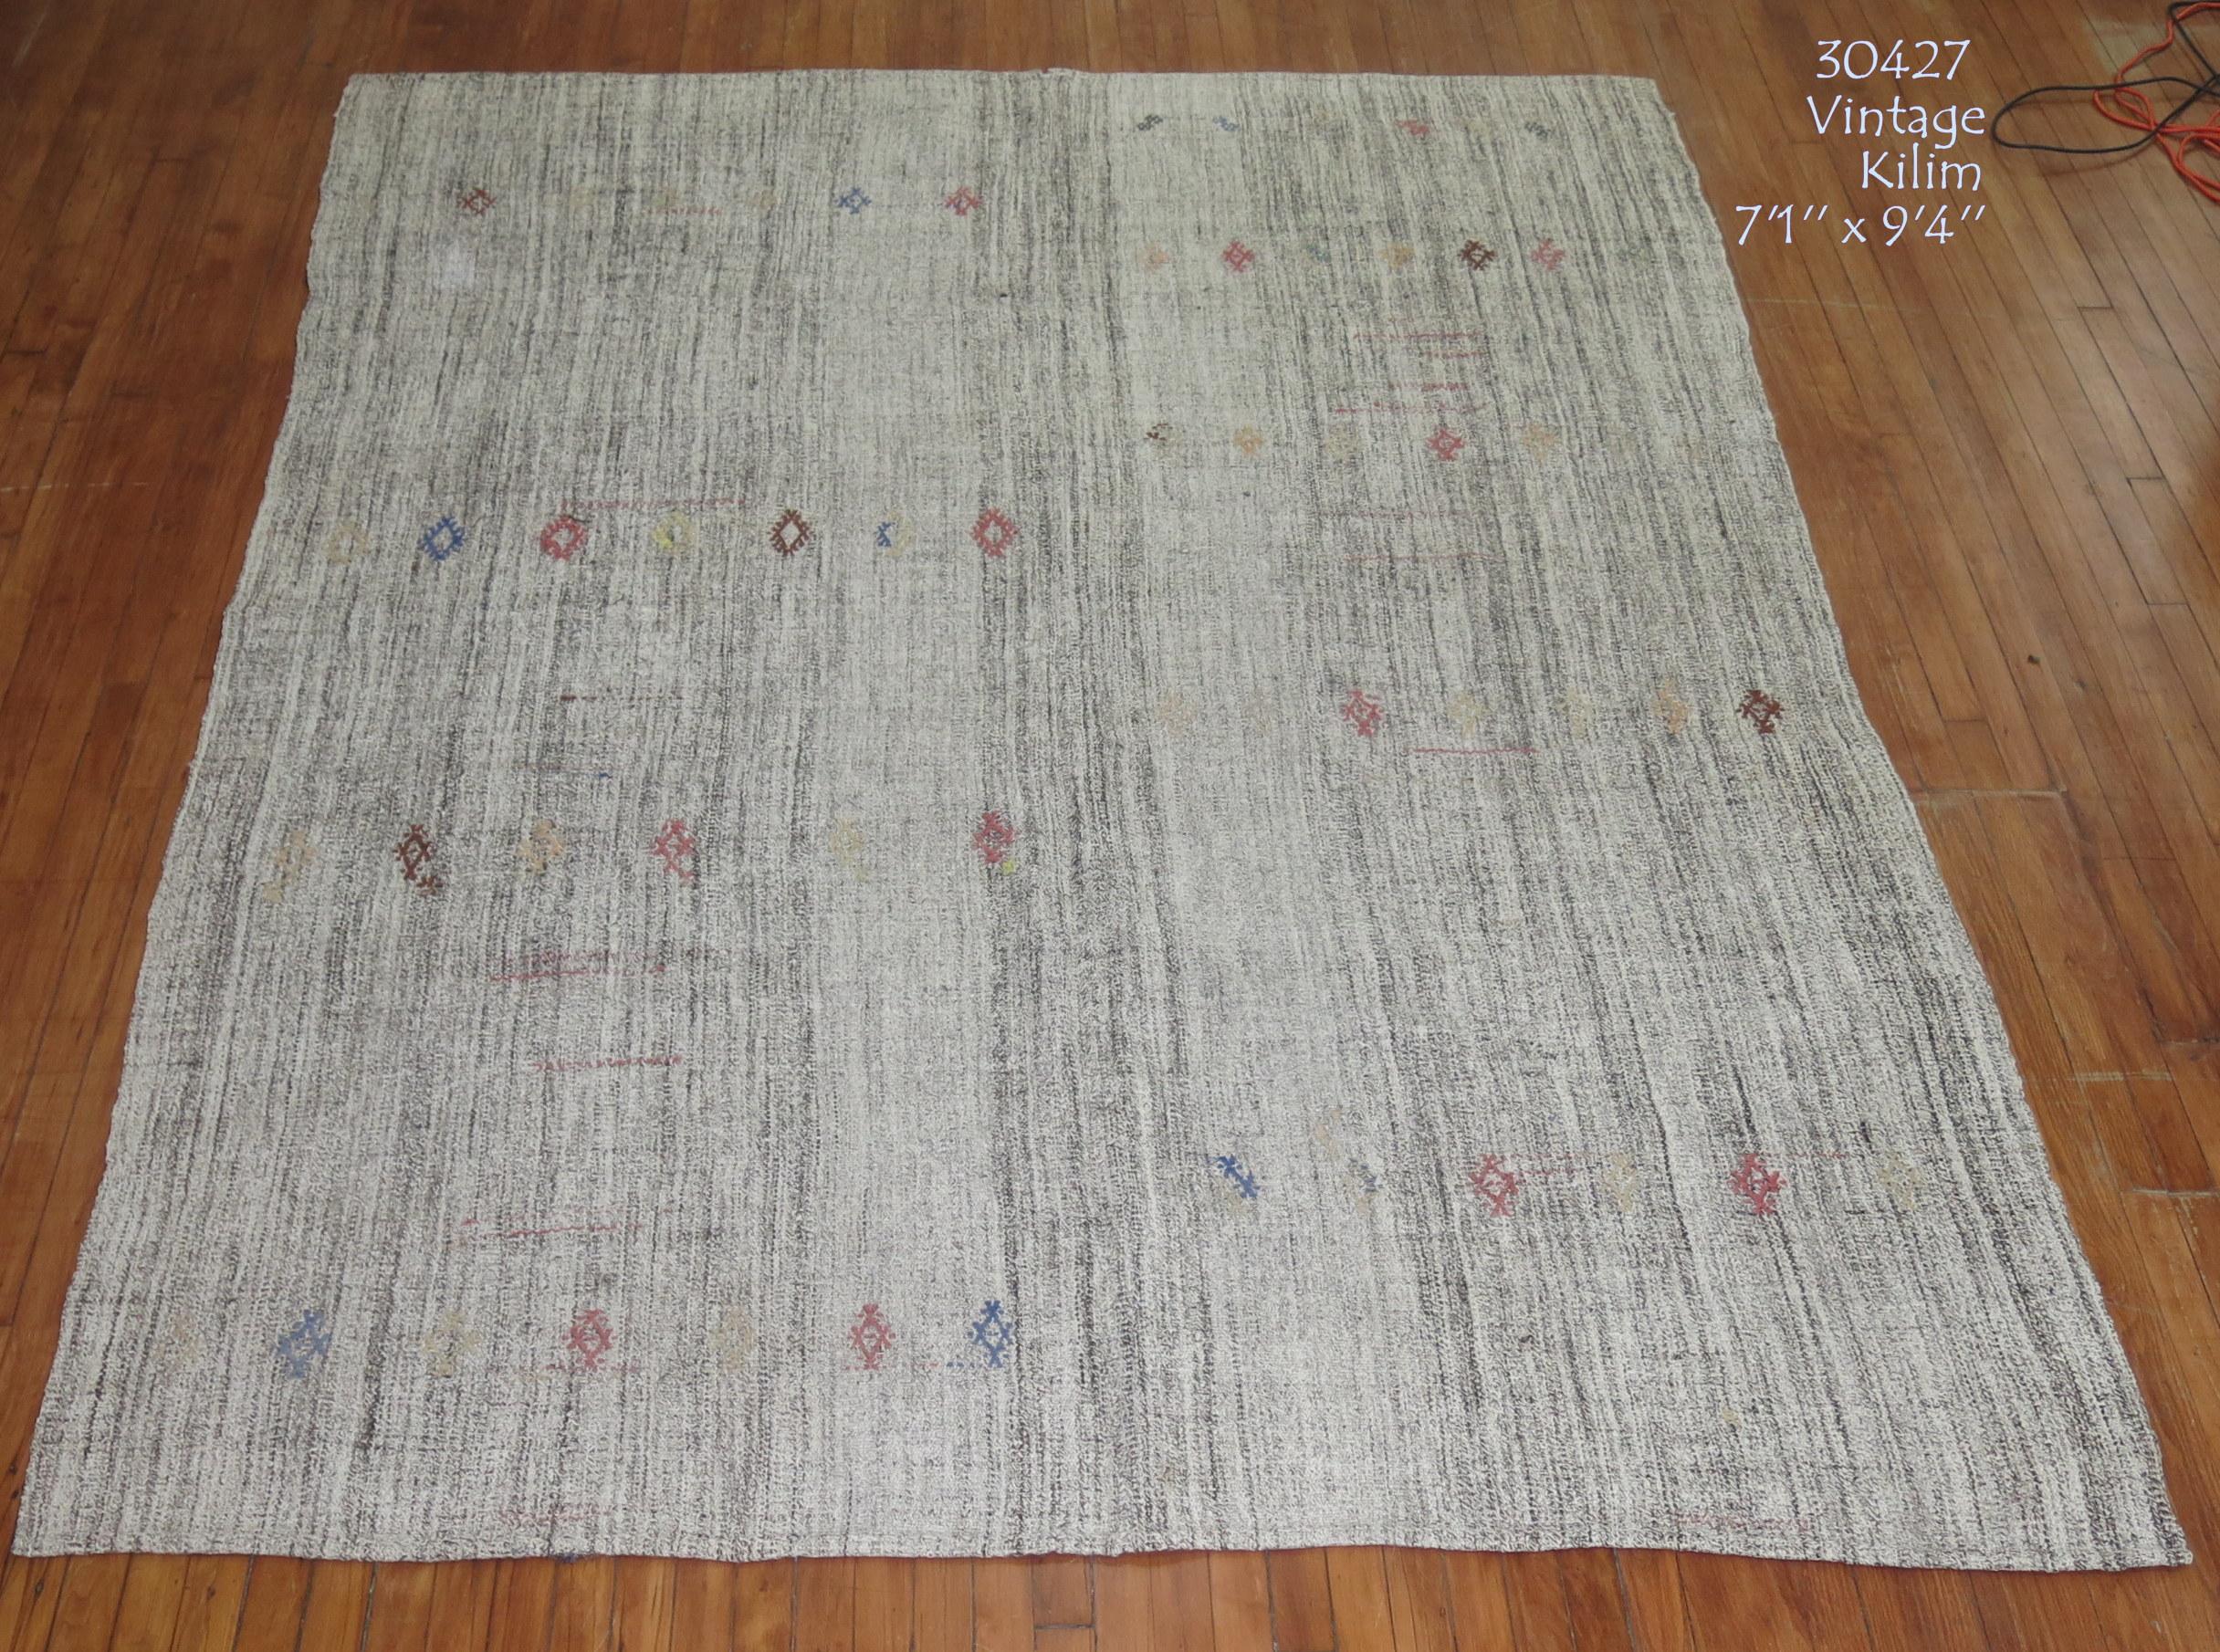 Midcentury Kilim with an abrashed gray/silver ground with small nomadic geometric motifs in earth accents. Measures: 7'1